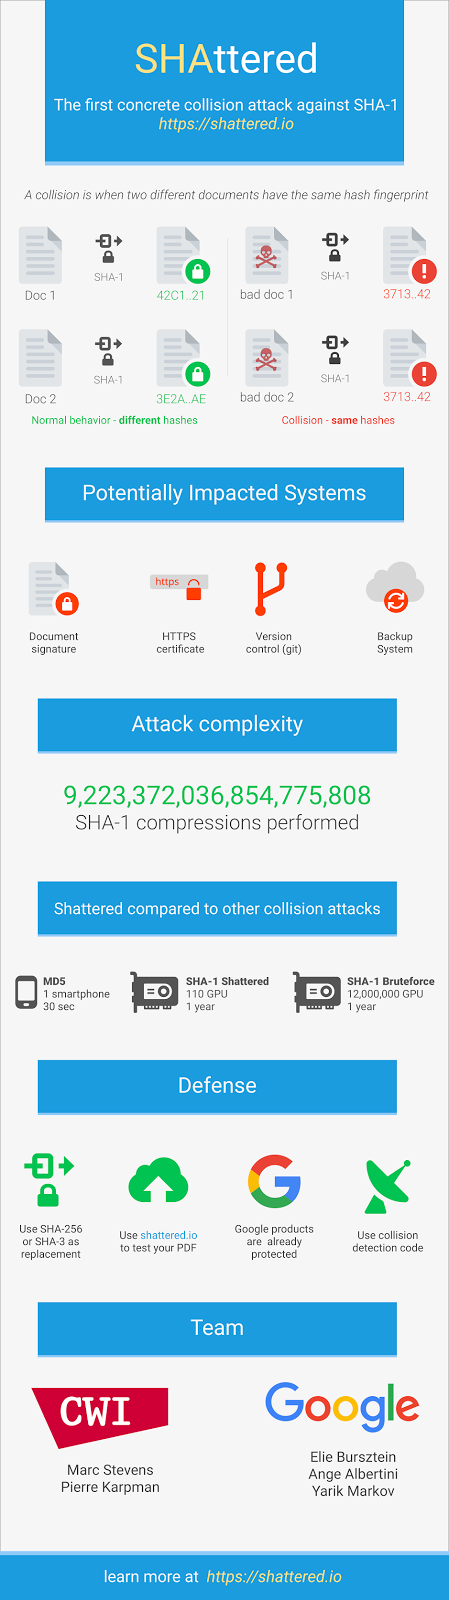 shattered-infographic